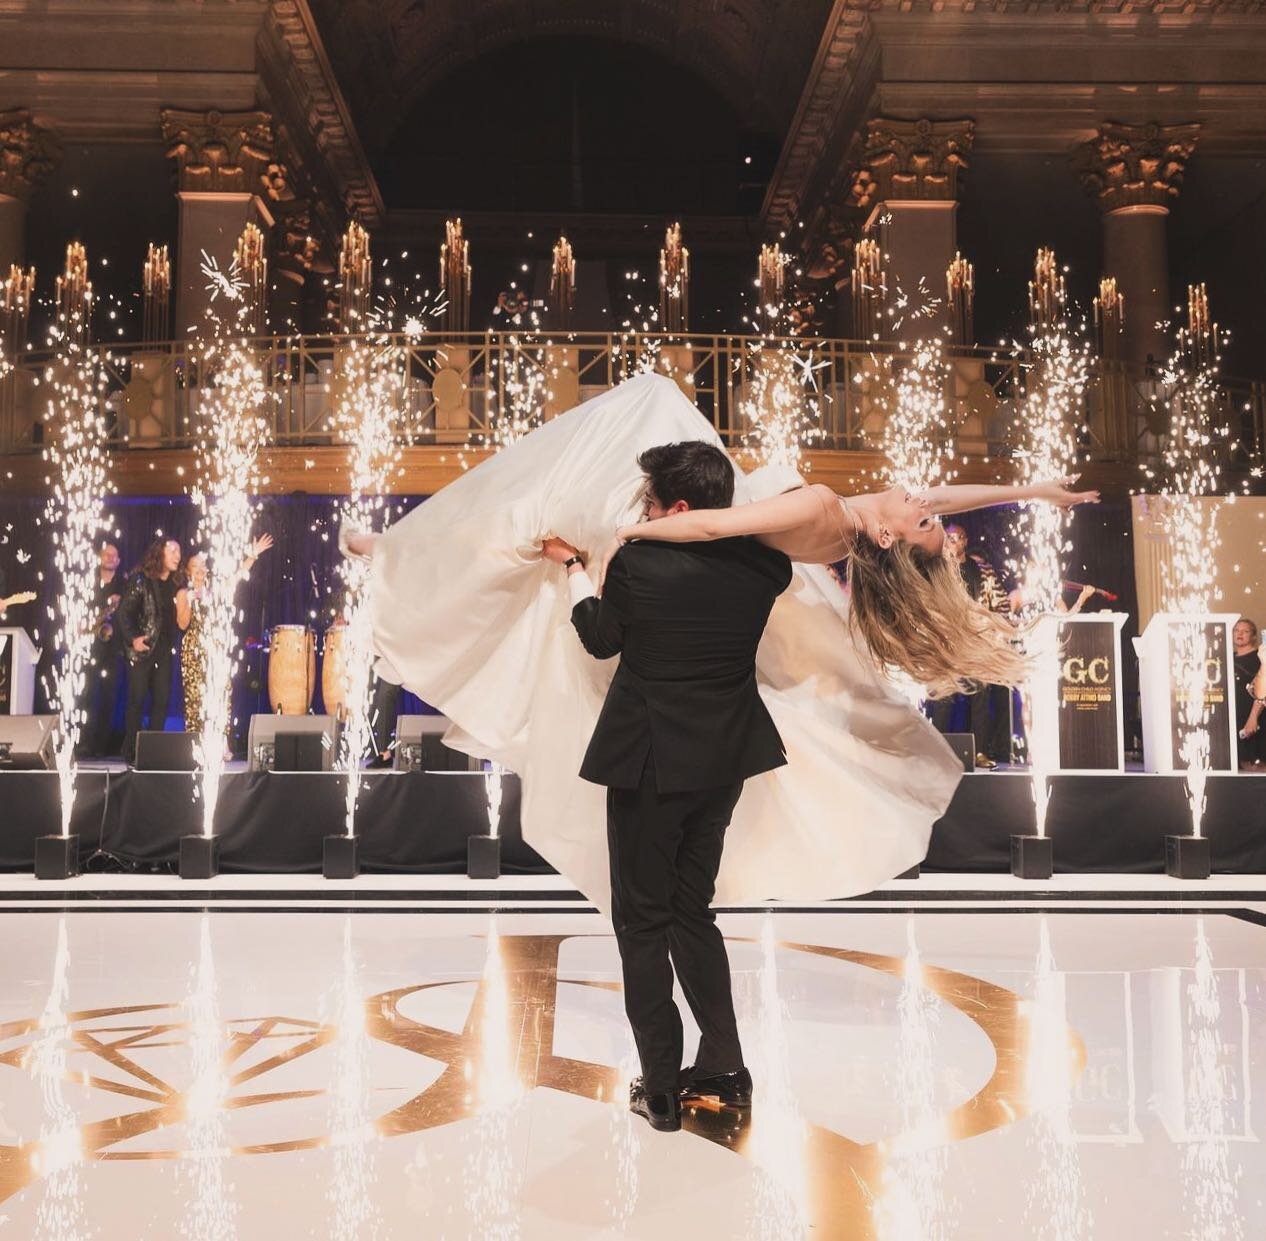 We can&rsquo;t say we&rsquo;ve fully recovered from this incredible wedding earlier this past summer ✨💎

Event Planning &amp; Design: @stateoftheartny
Photographer/Videographer: @brettmattewsgallery
D&eacute;cor: @konstantinosfloraldesign
Lighting: 